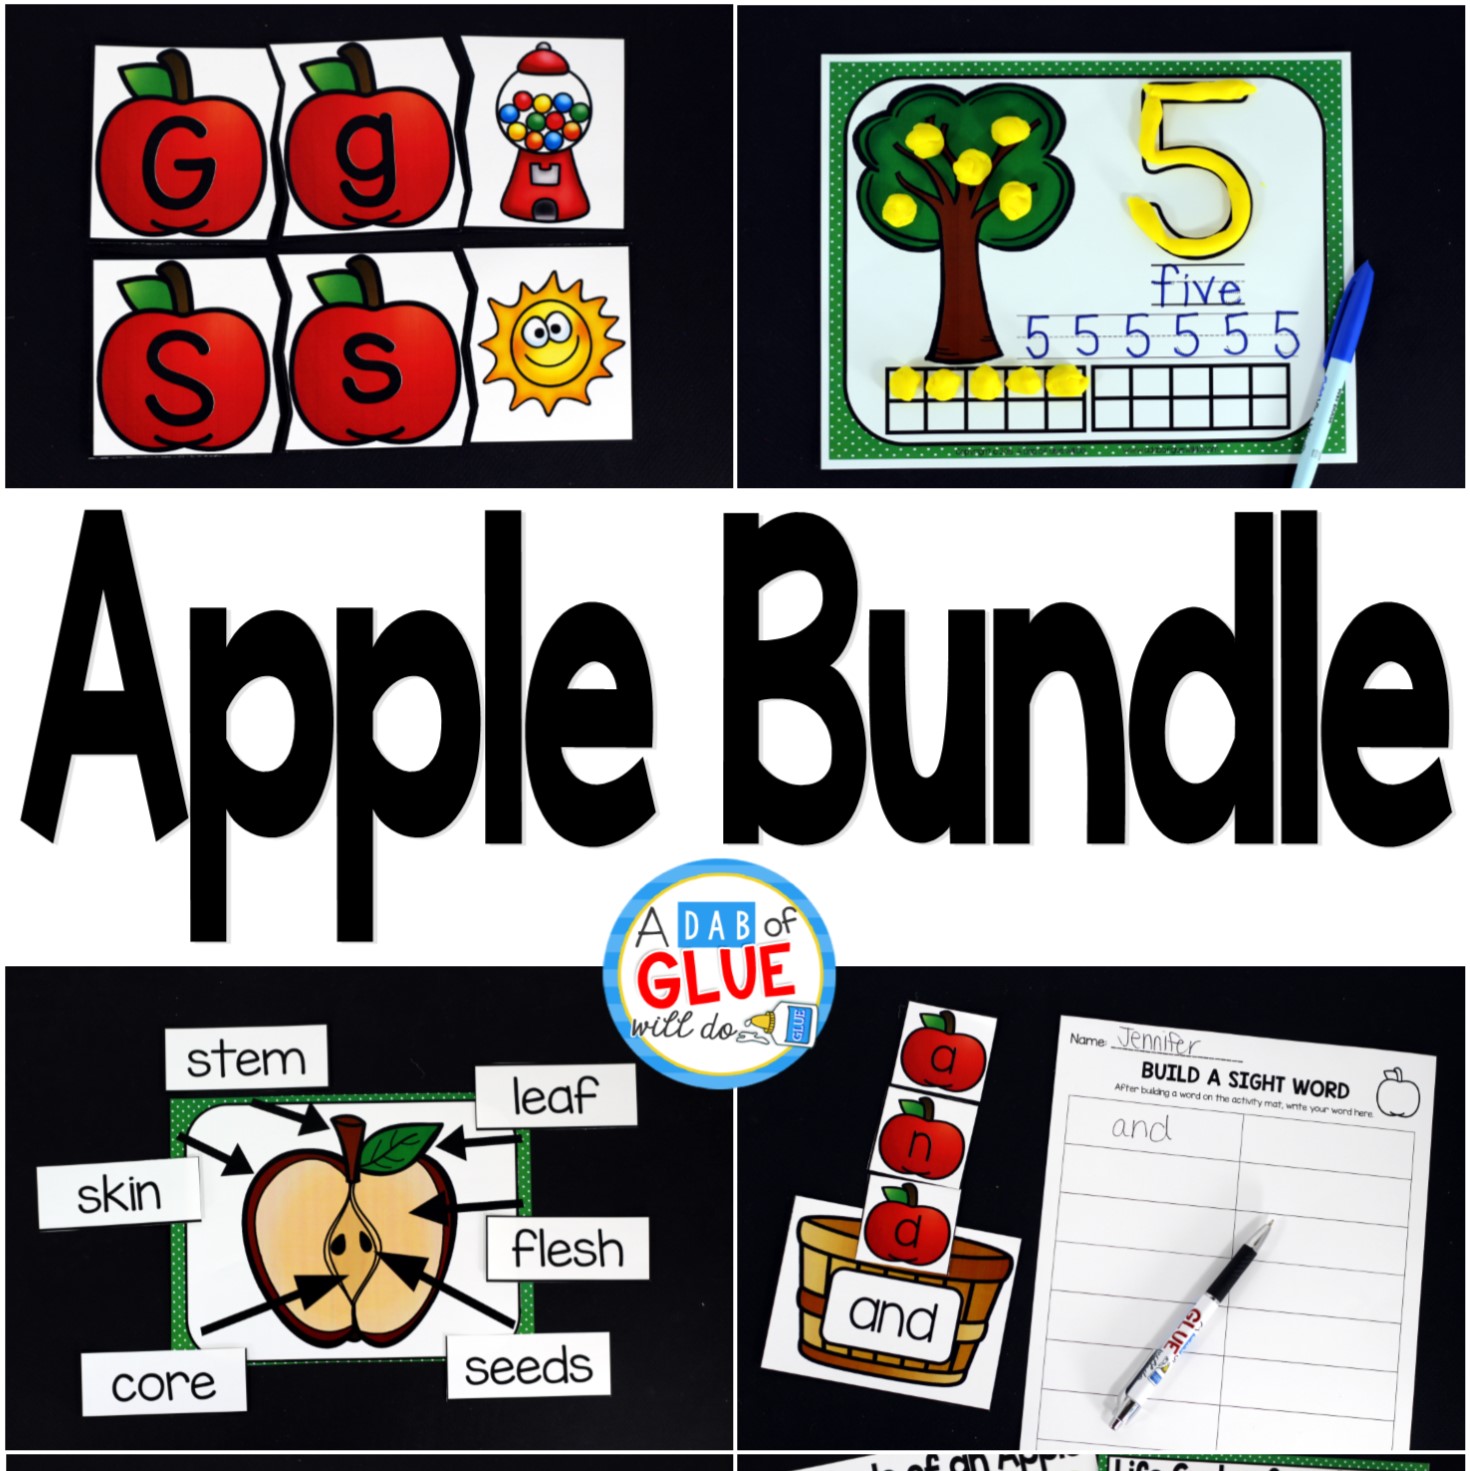 Engage your class in an exciting hands-on experience learning more about the apple! This pack is perfect for science, language arts, and math centers in Kindergarten, First Grade, and Second Grade classrooms and packed full of inviting student activities. Celebrate Fall with apple themed center student worksheets.  Students will learn more about apples using puzzles, worksheets, clip cards, and subtraction mats. This pack is great for homeschoolers, hands-on kids activities, and to add to your unit studies!  Teachers will receive the complete unit for Autumn apple science, math, and literacy activities to help teach about apples to your lower elementary students!